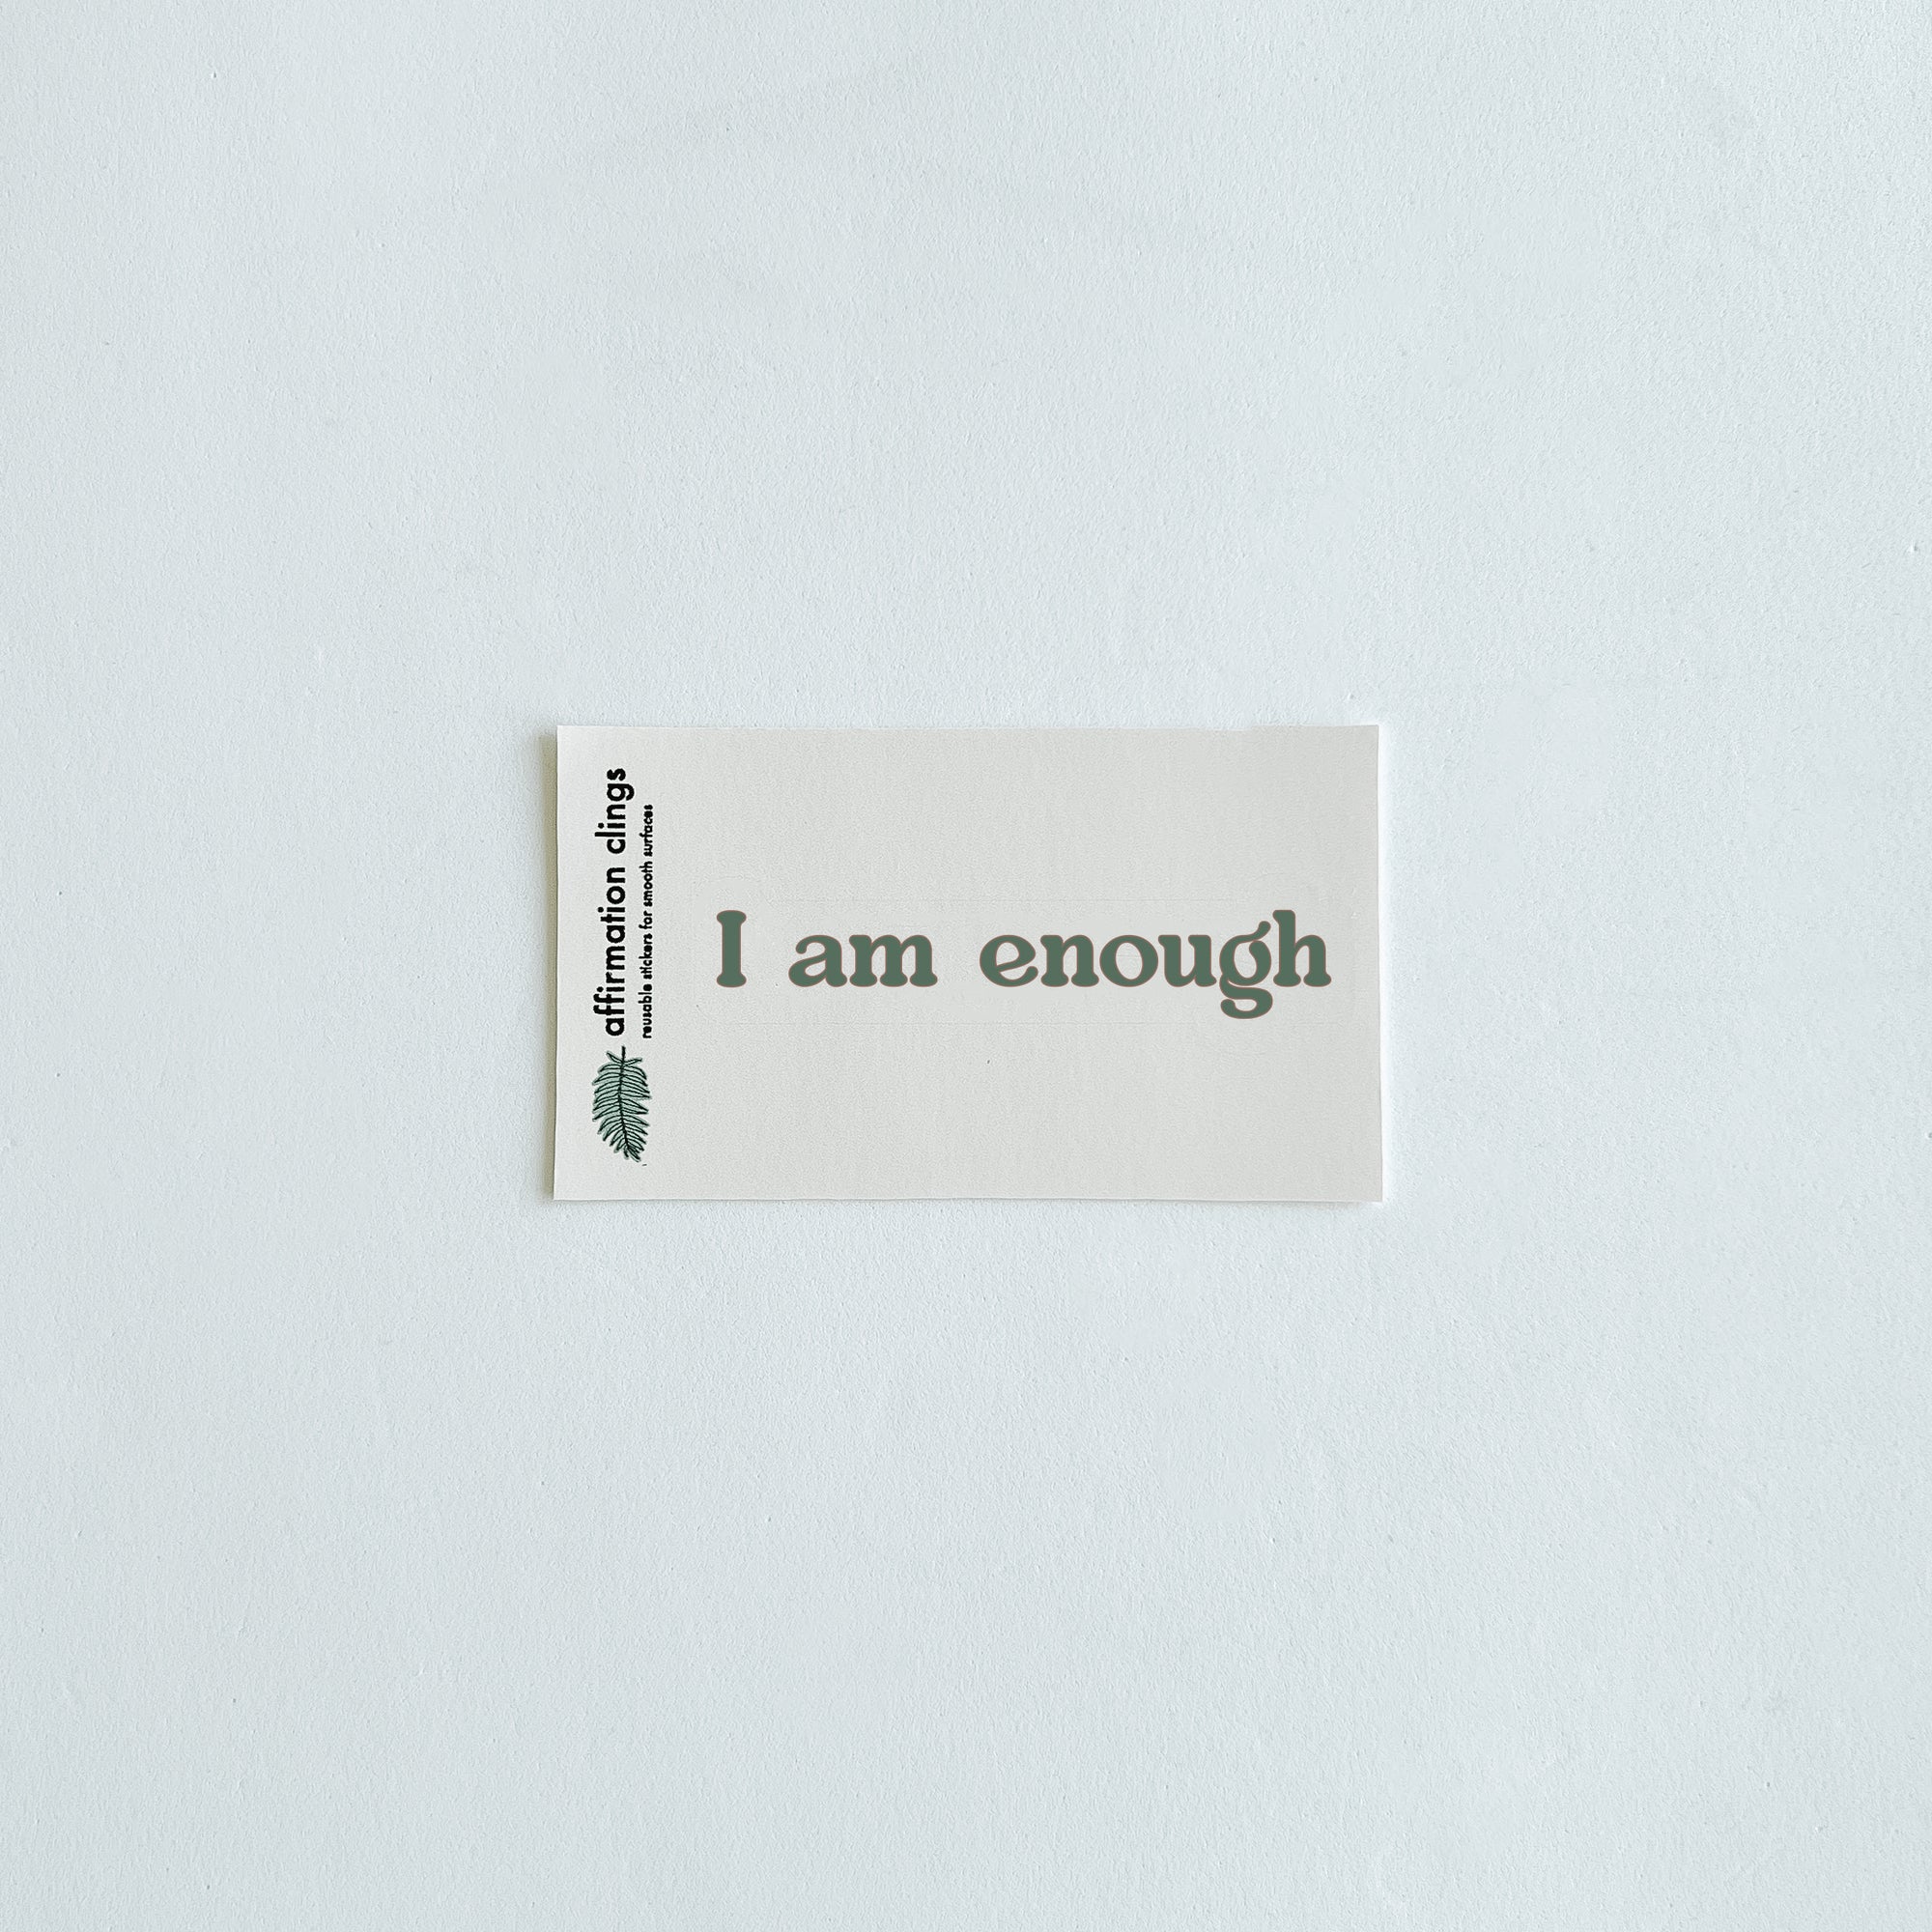 Affirmation | Enough | Quote Clings